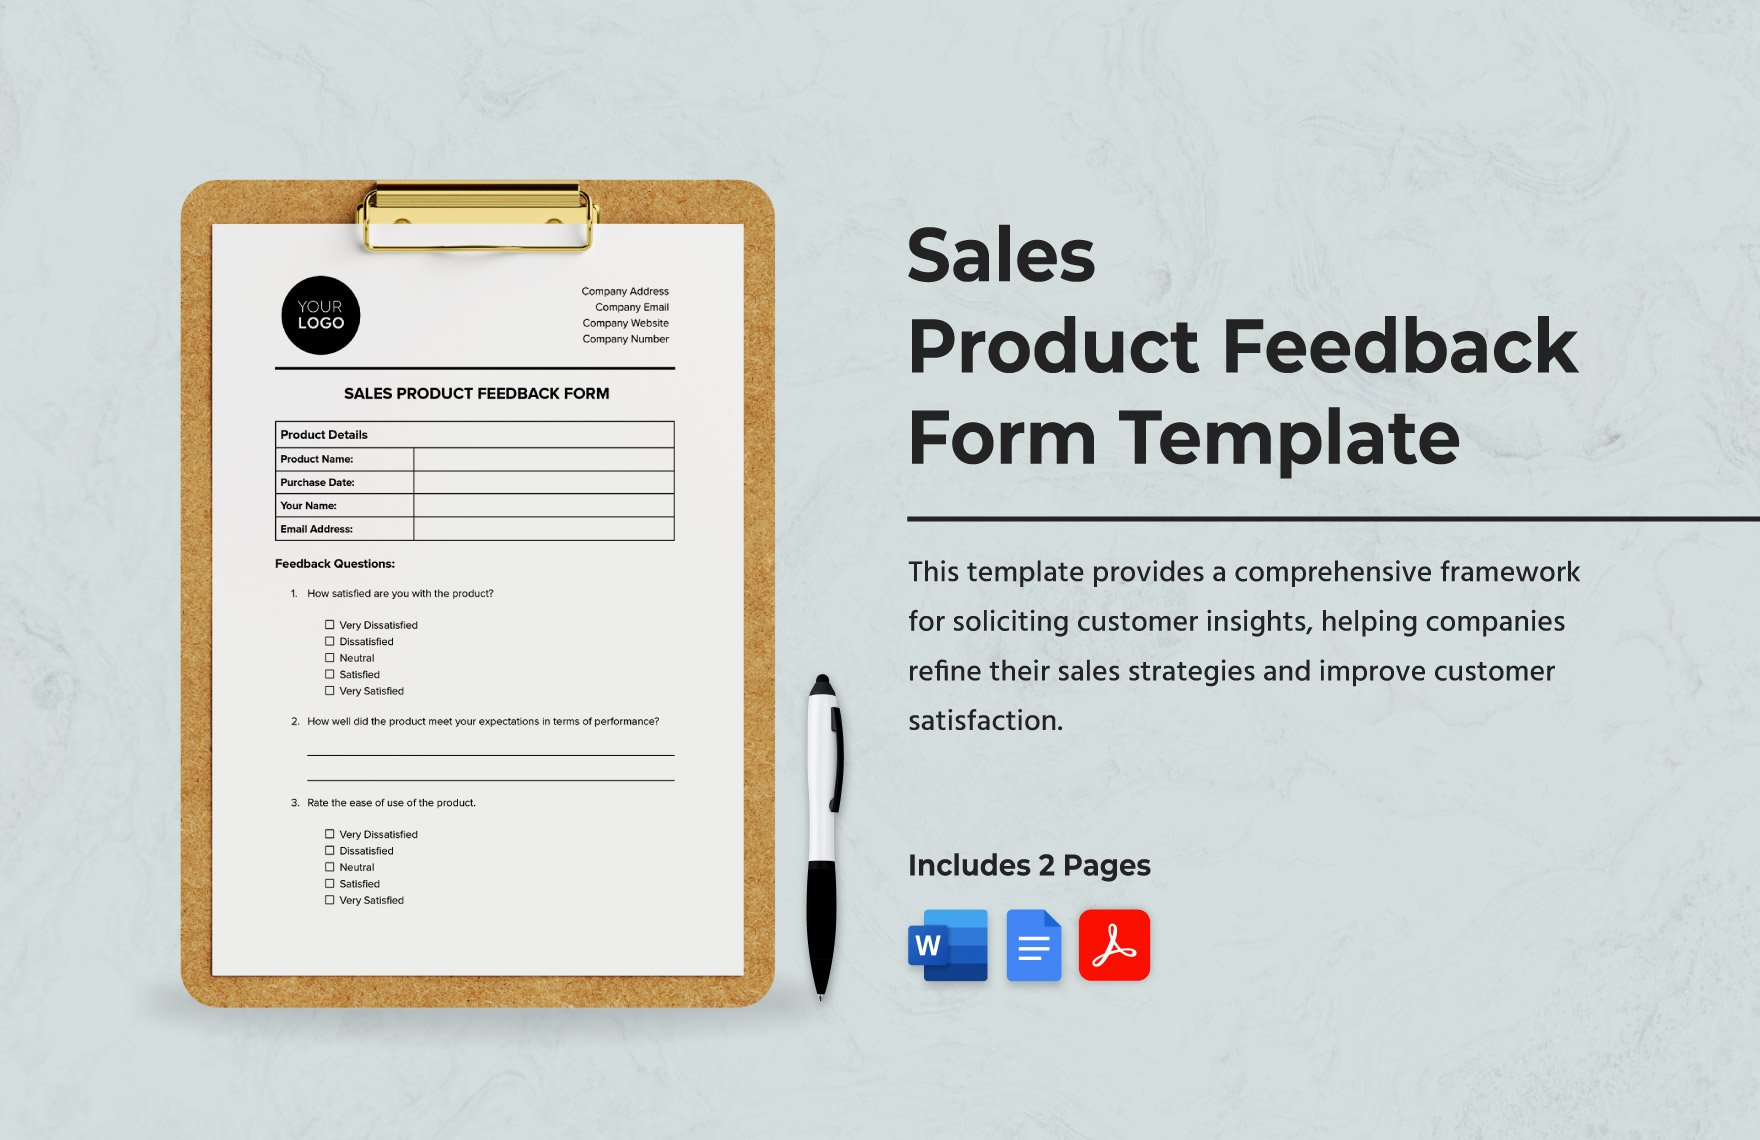 Sales Product Feedback Form Template in Word, Google Docs, PDF